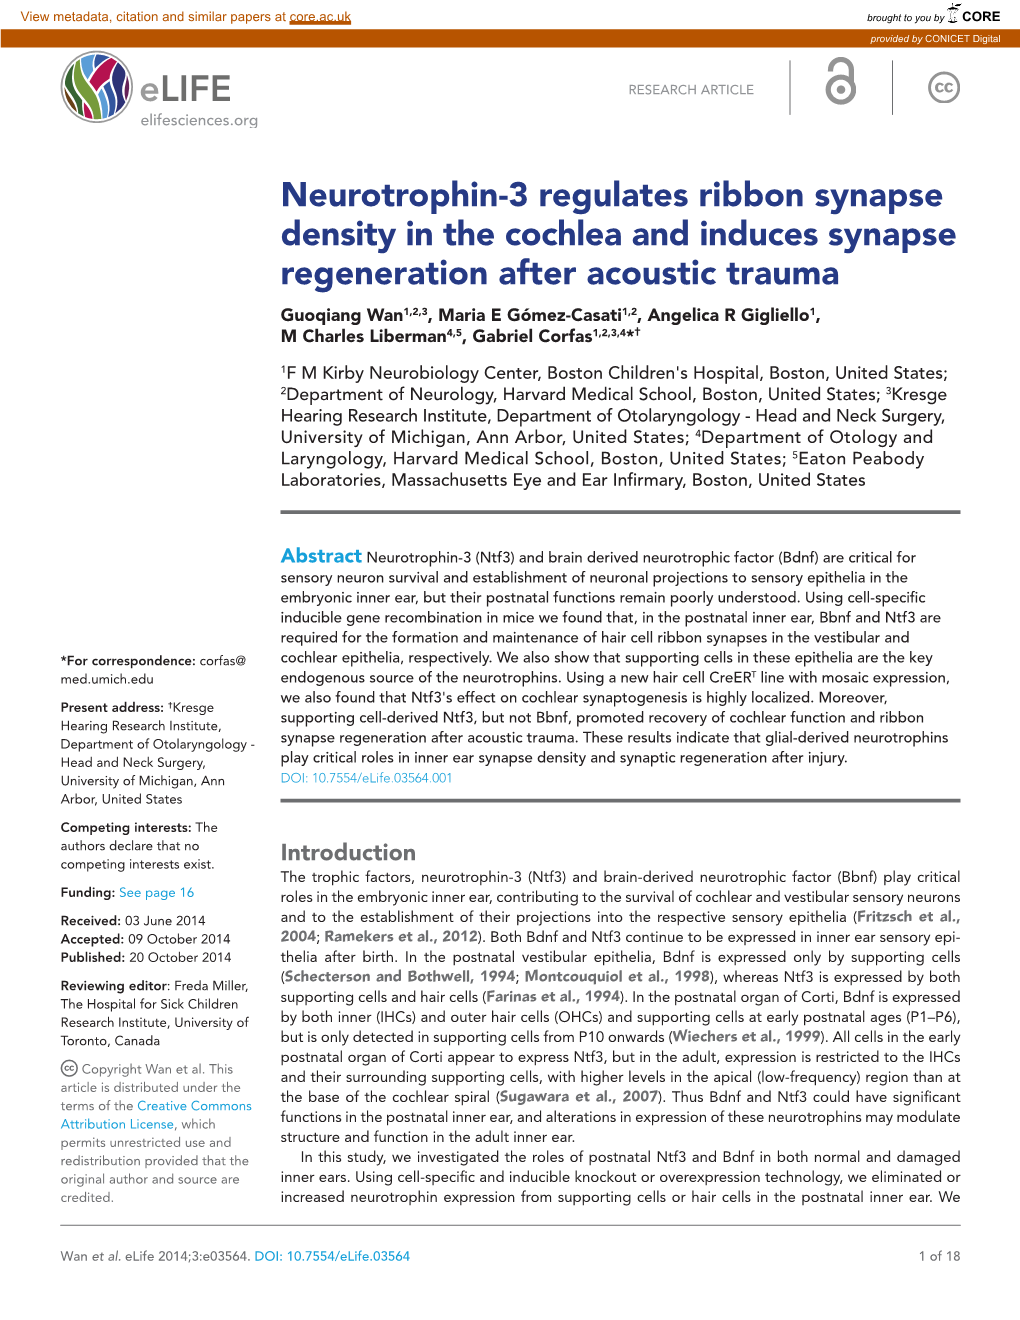 Neurotrophin-3 Regulates Ribbon Synapse Density in the Cochlea And